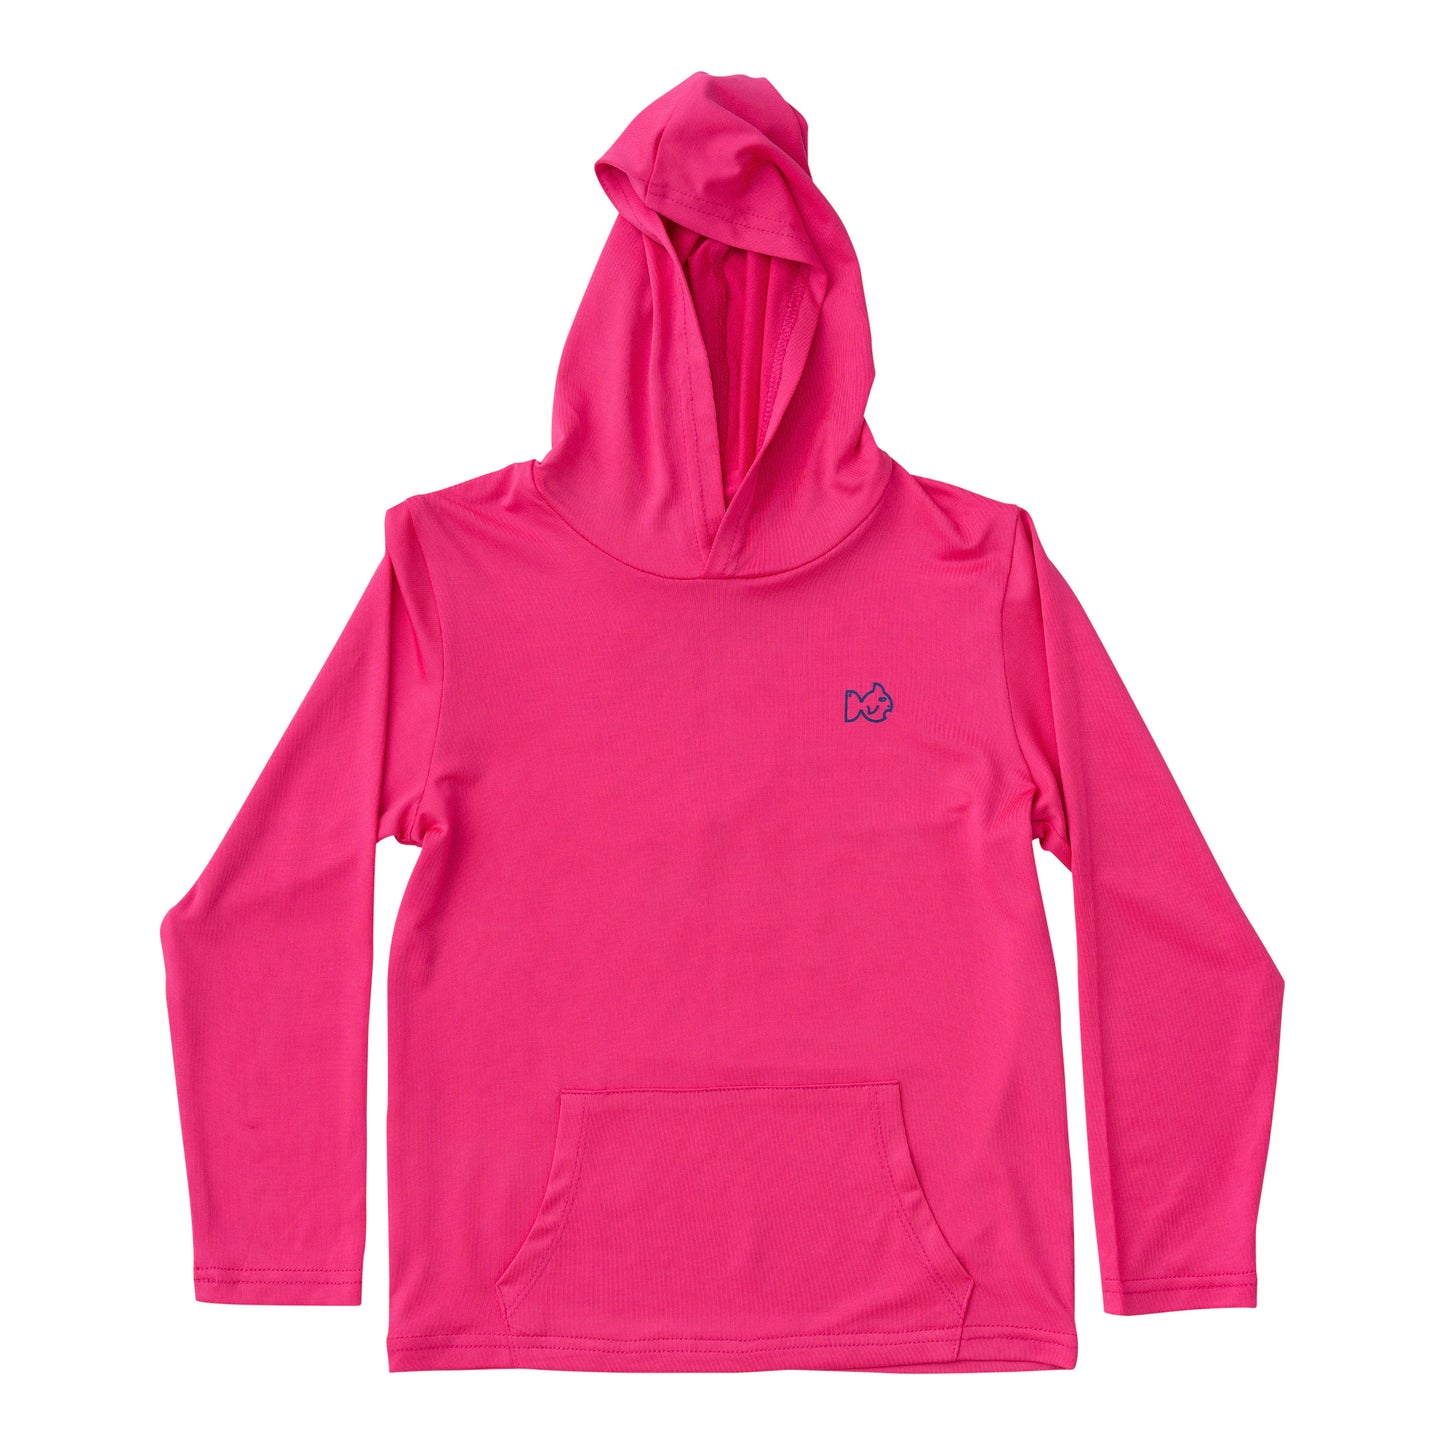 Prodoh Pro Performance Hoodie - Cheeky Pink